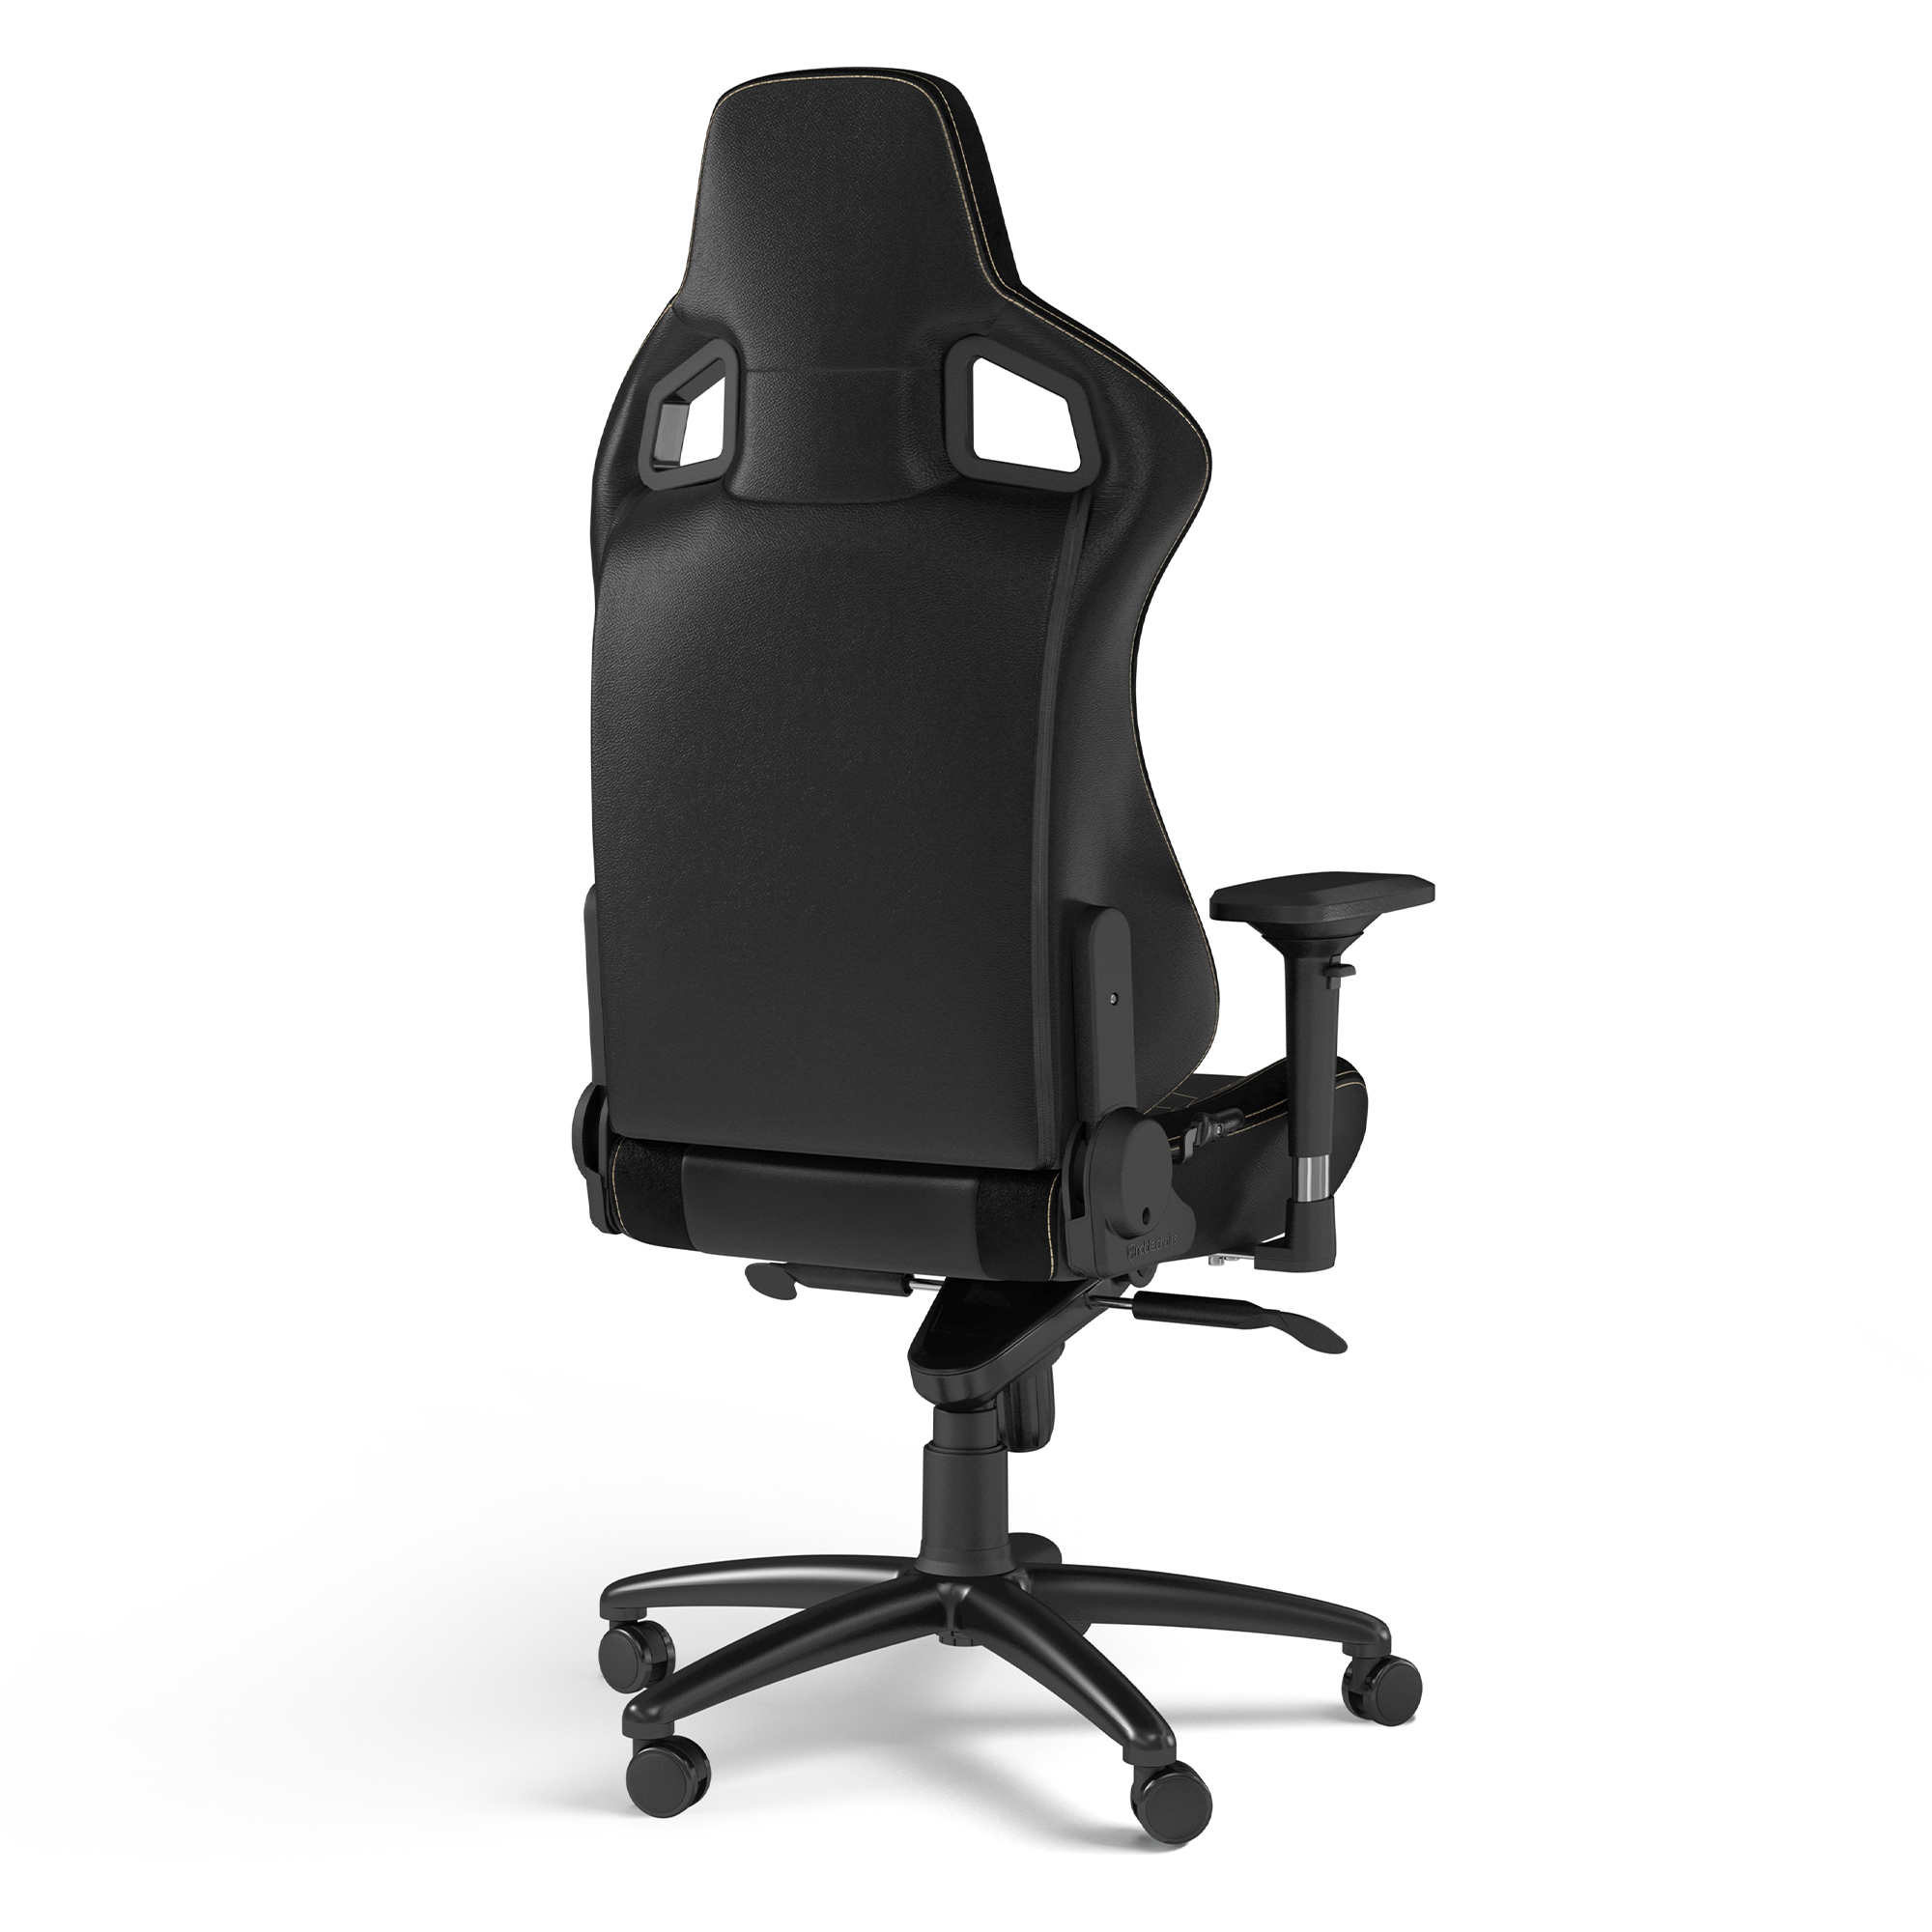 noblechairs - noblechairs EPIC Gaming Chair - Black/Gold